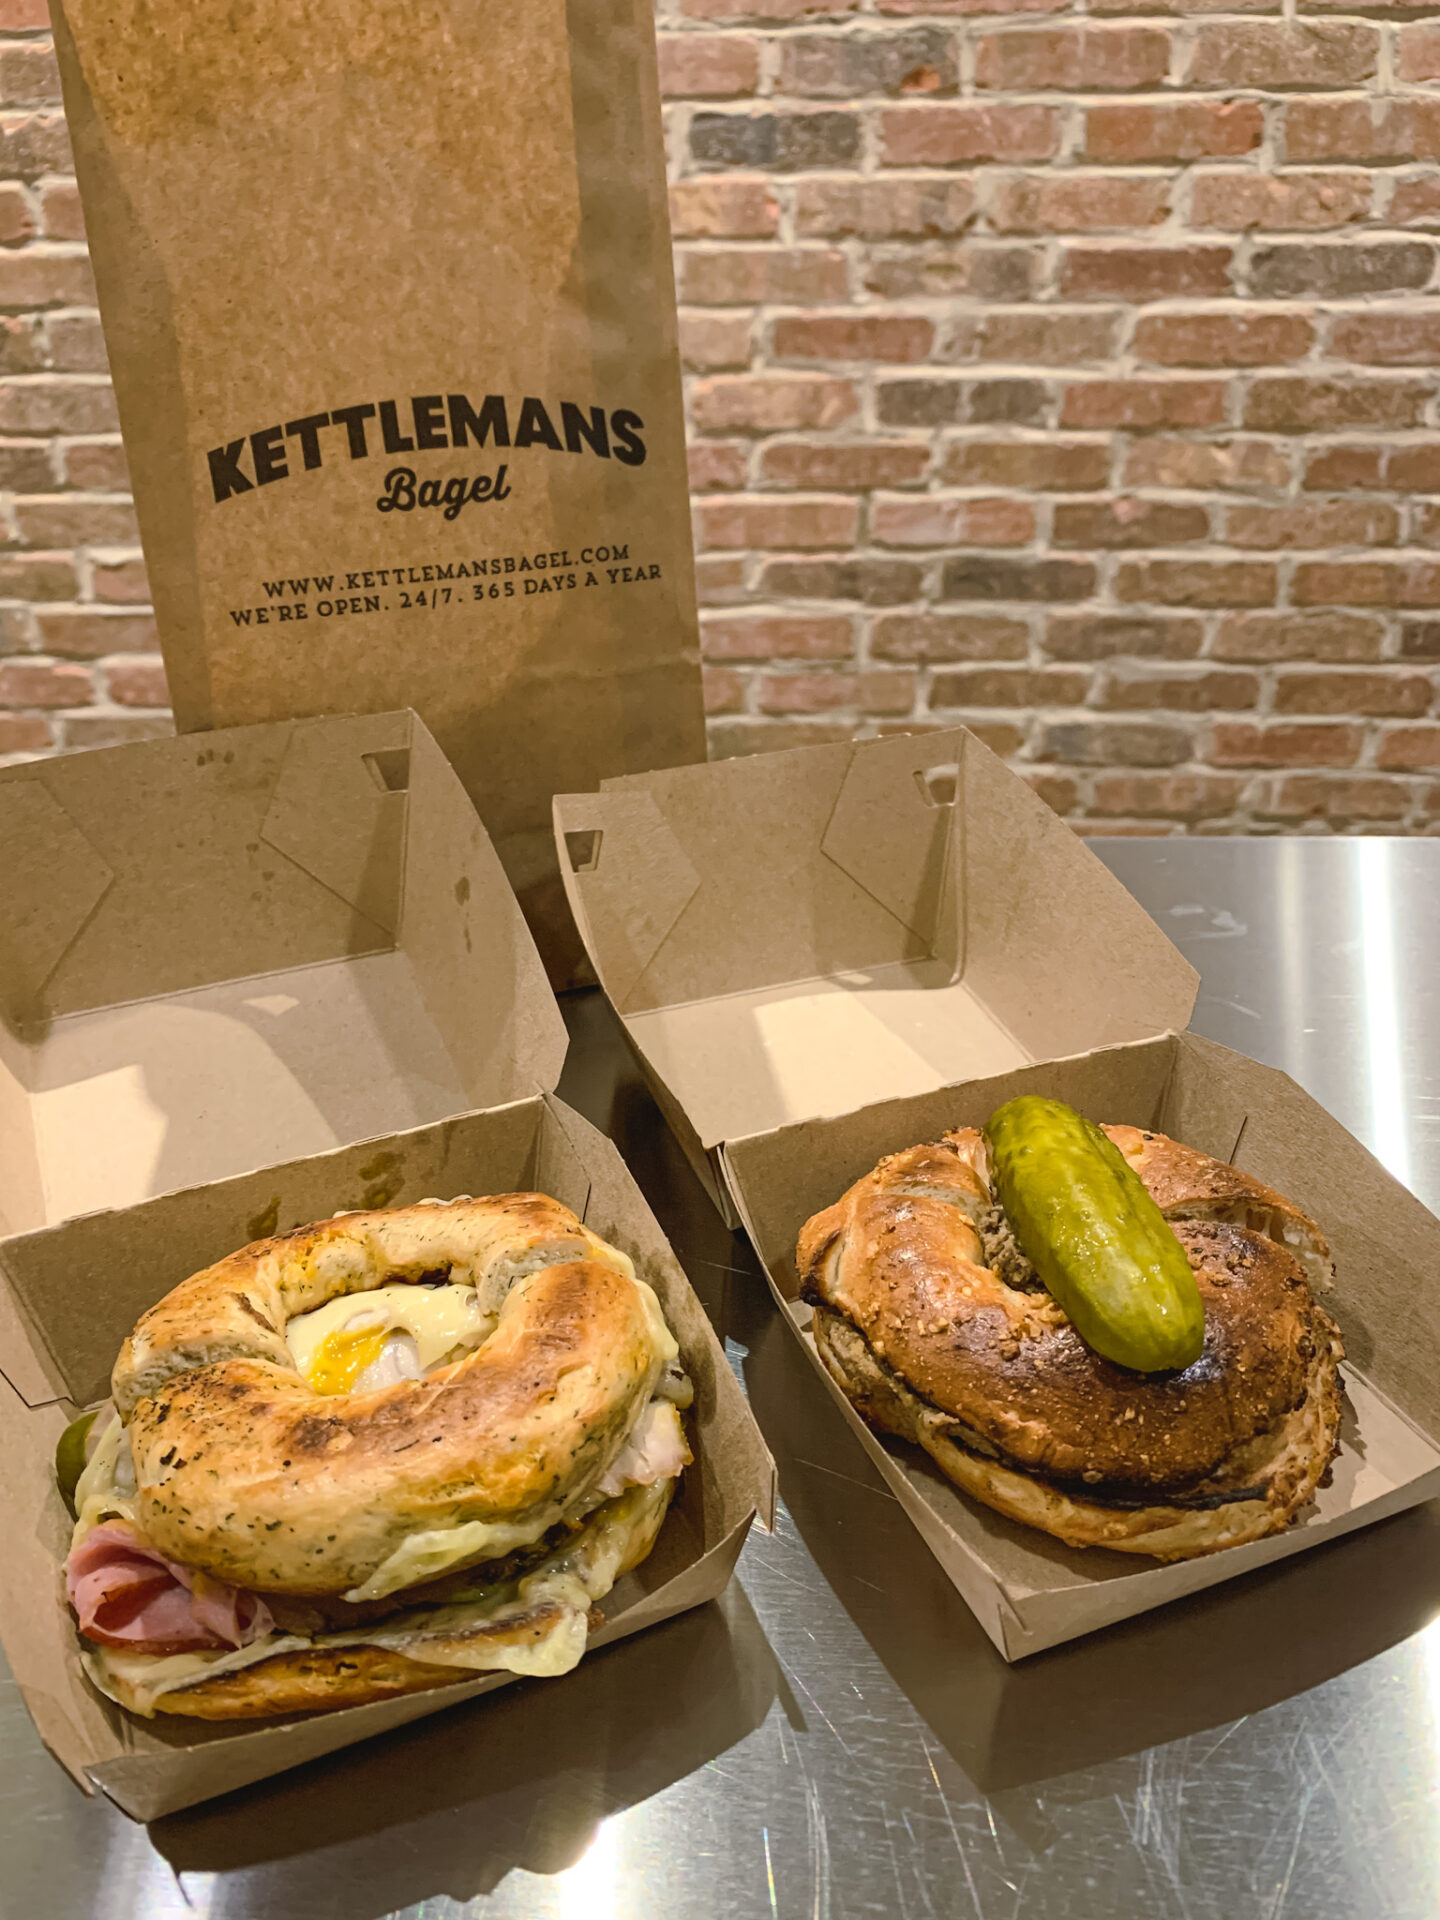 Sandwiches from Kettleman's Bagels in Toronto